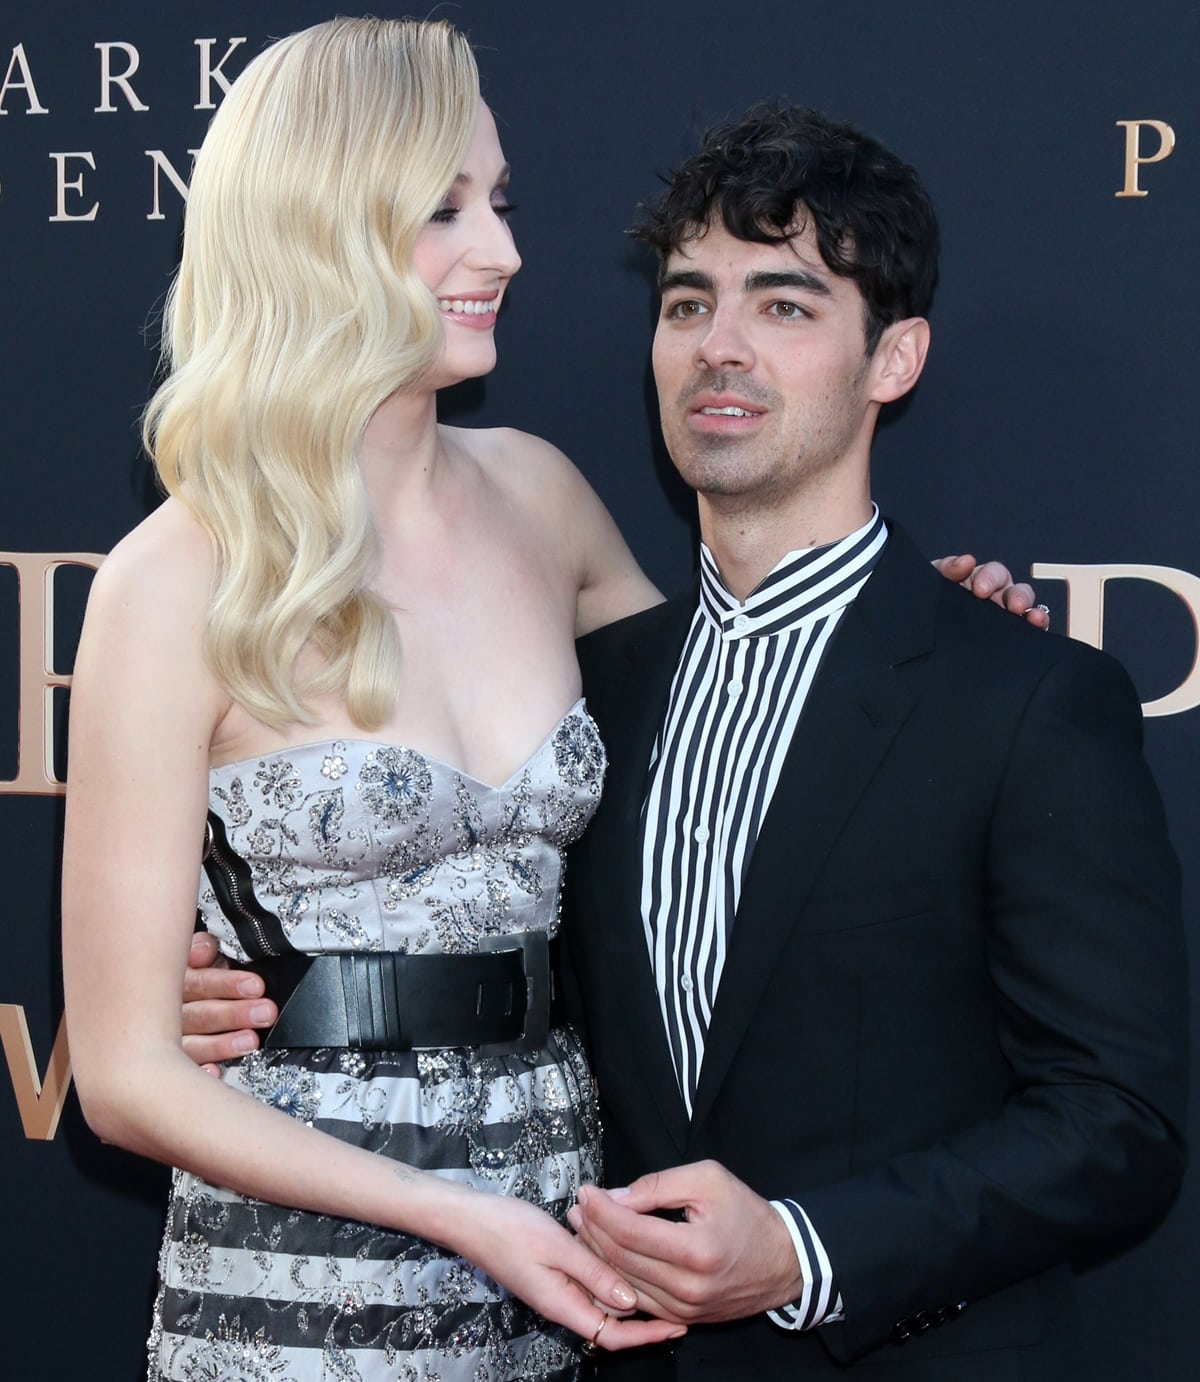 Joe Jonas stands significantly shorter than Sophie Turner when standing next to each other